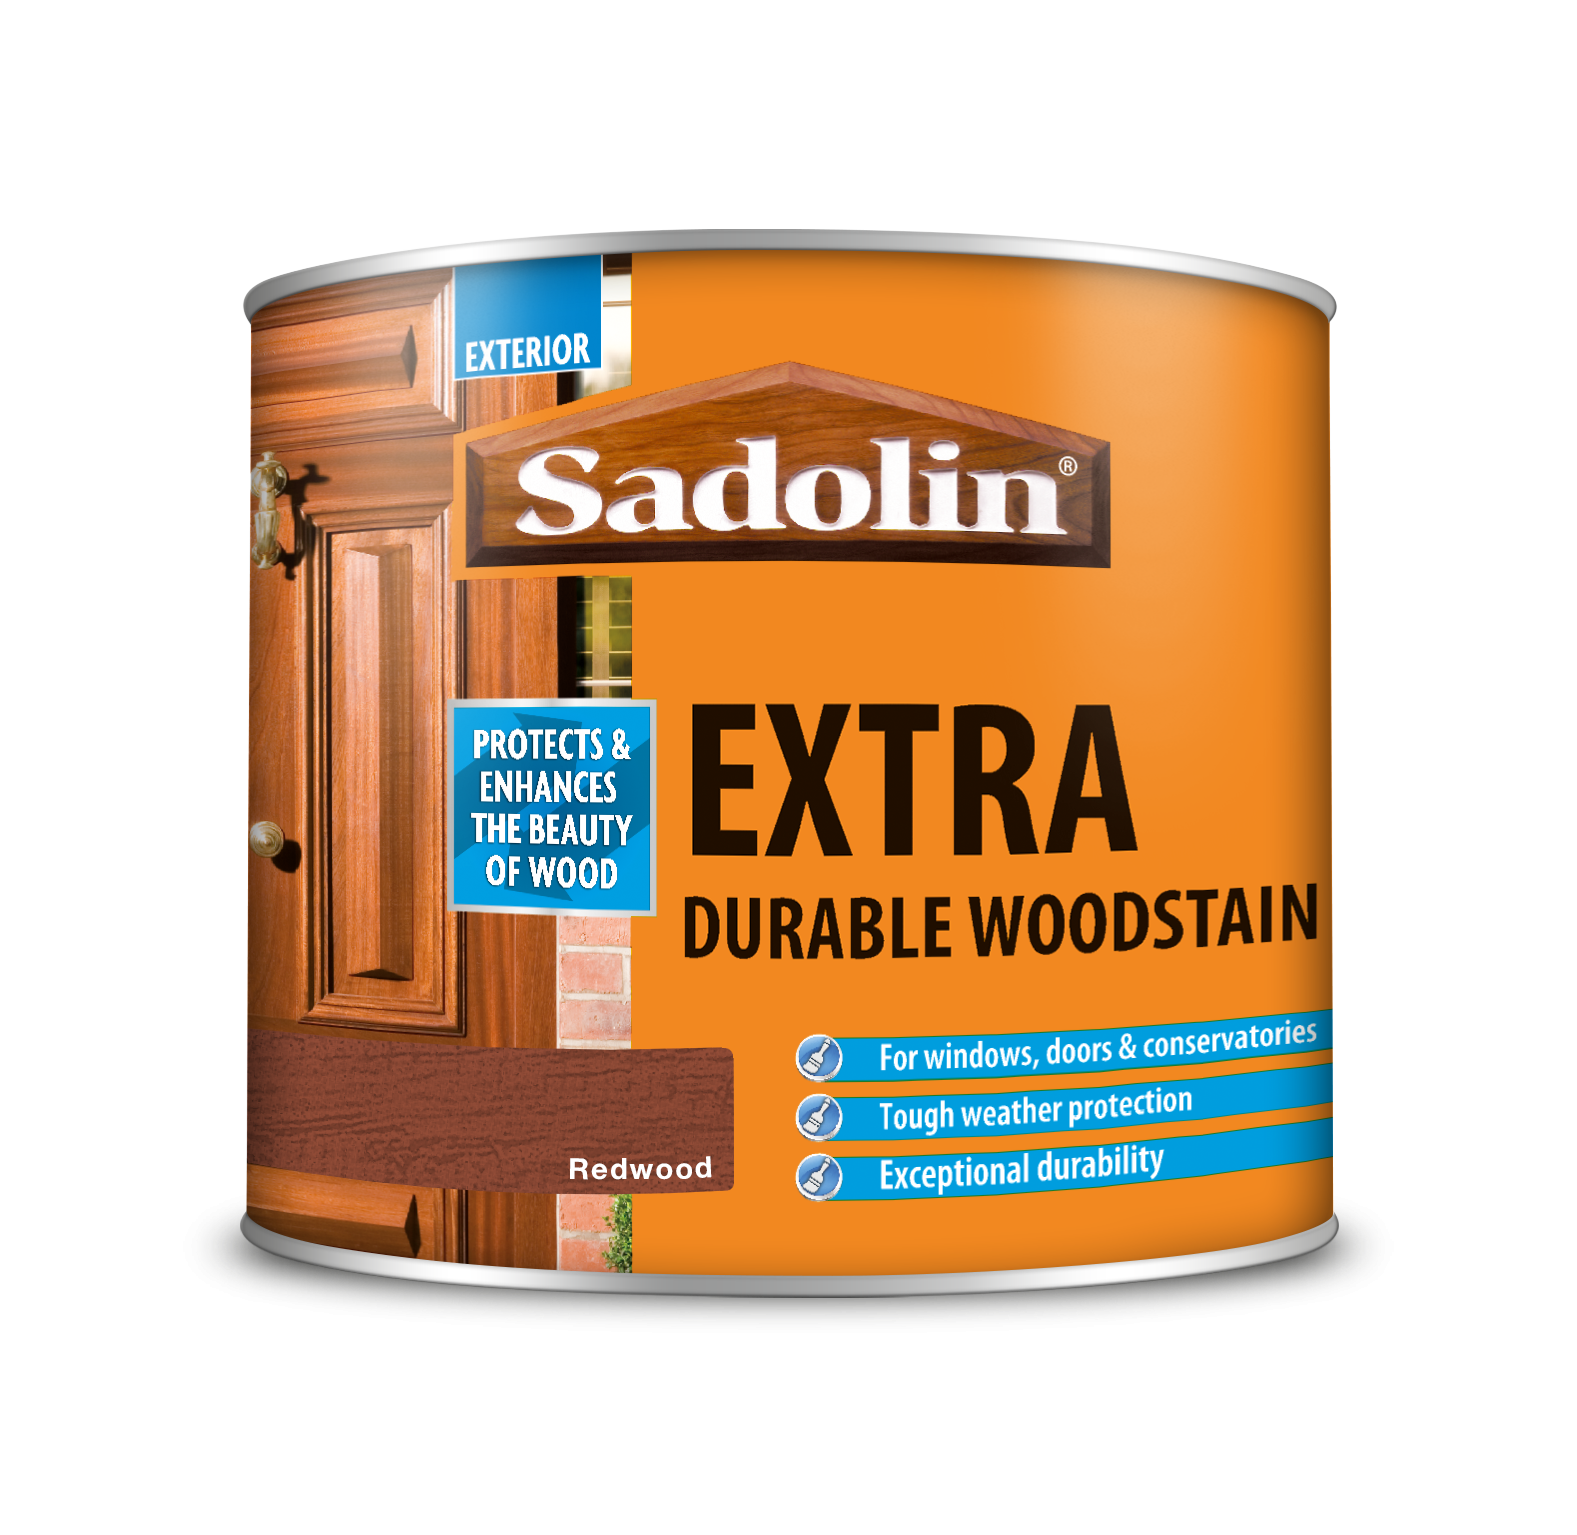 Sadolin Extra Durable Woodstain Redwood 500ml [MPPSSUM]  5028544